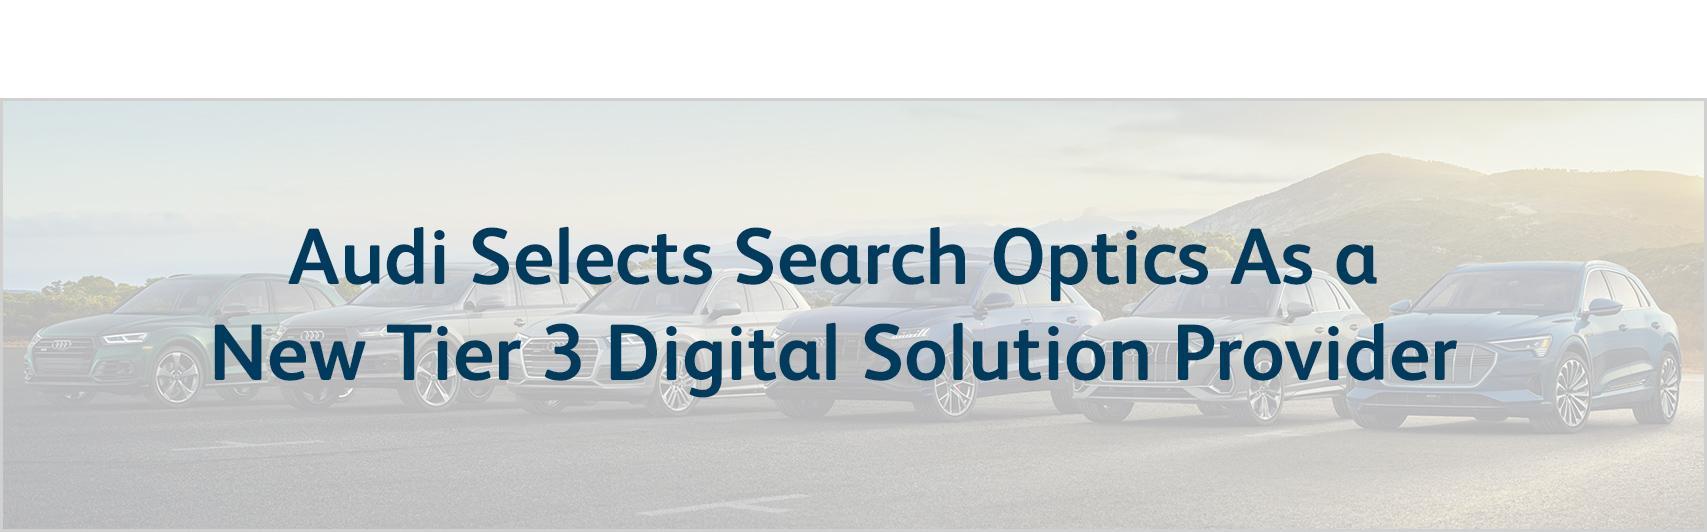 Search Optics Selected by Audi as a New Tier 3 Digital Solutions Provider